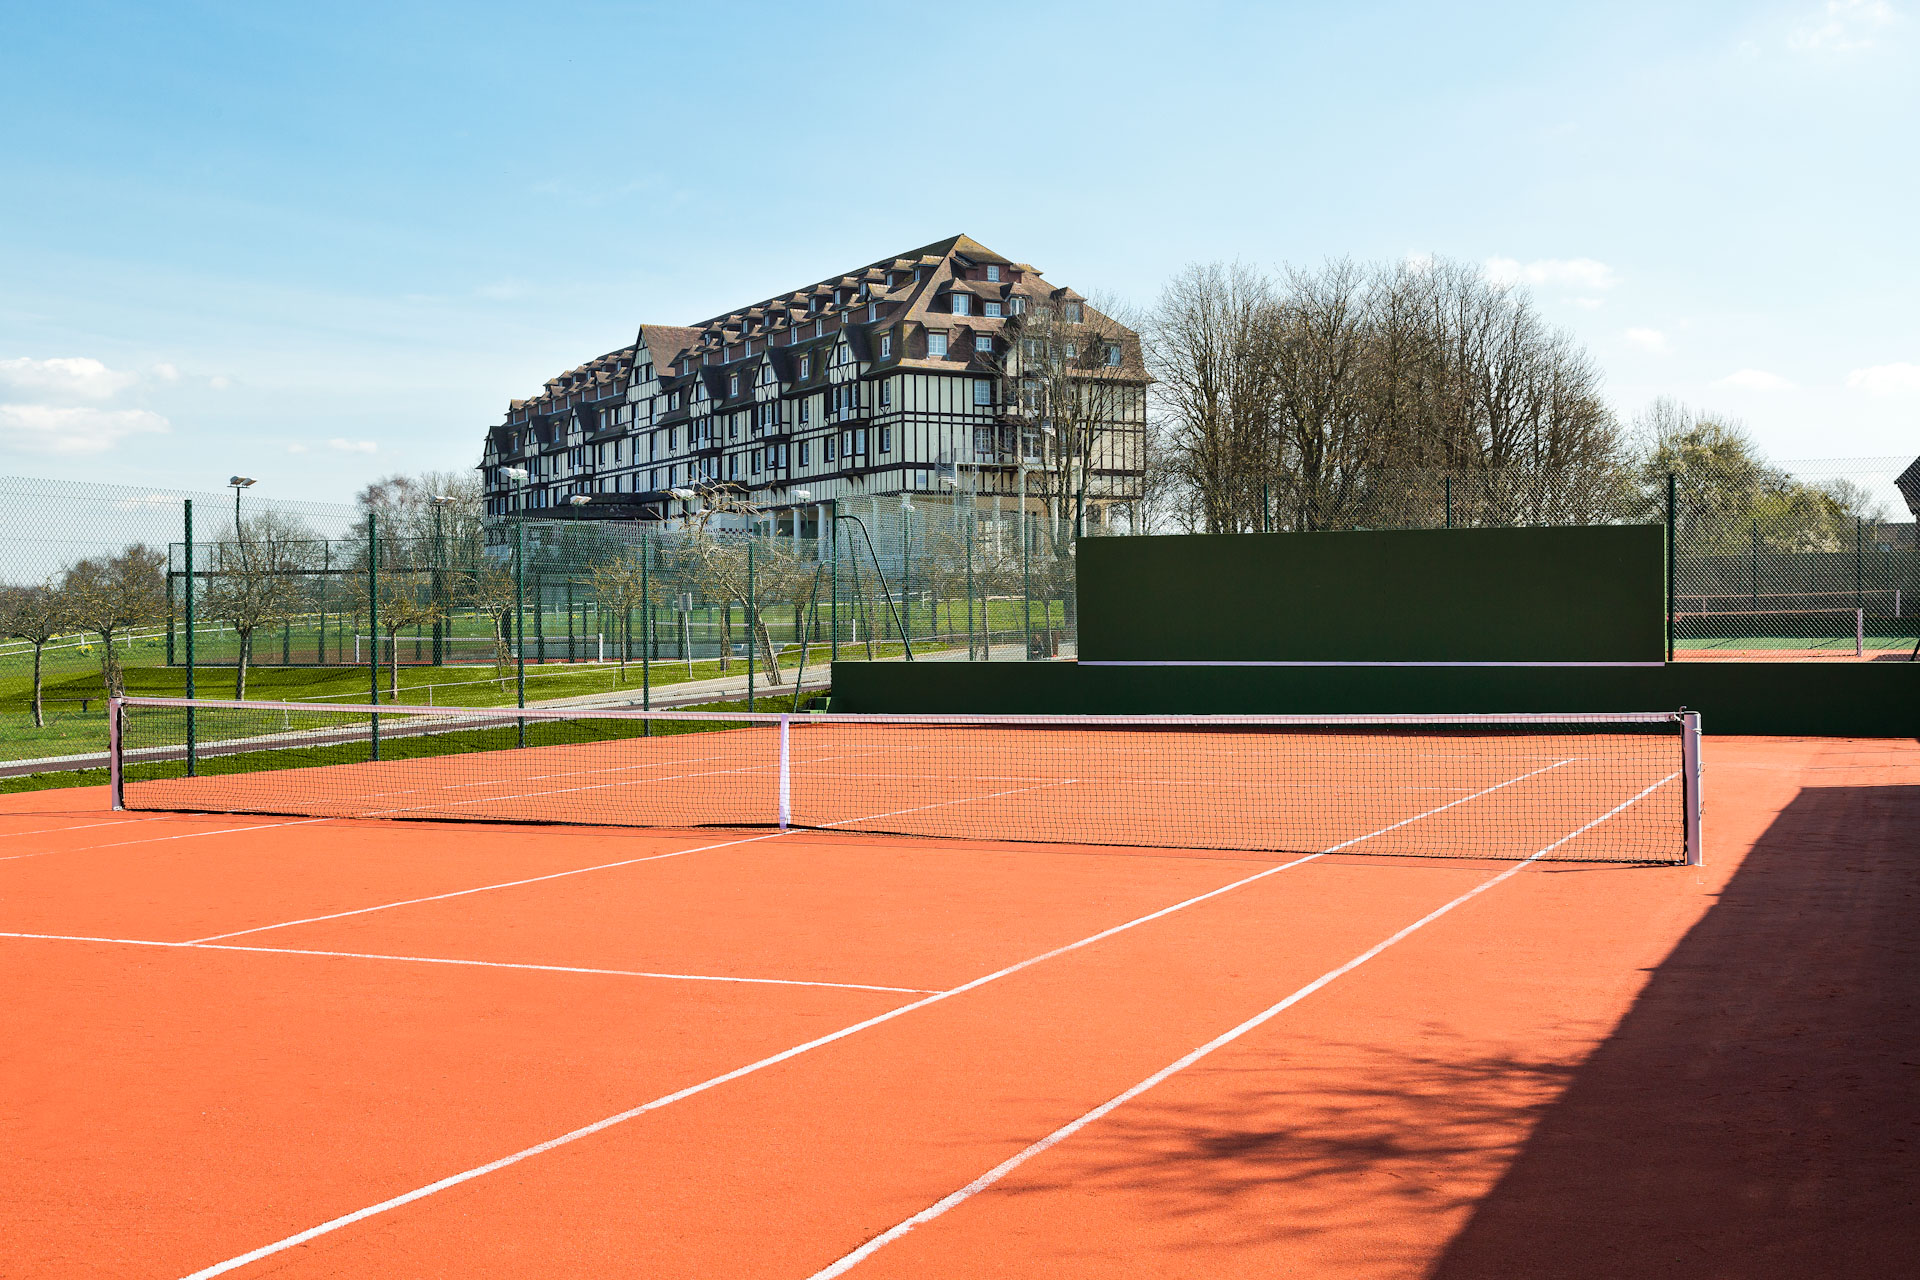 The tennis courts at Hotel du Golf Barriere, Deauville, France